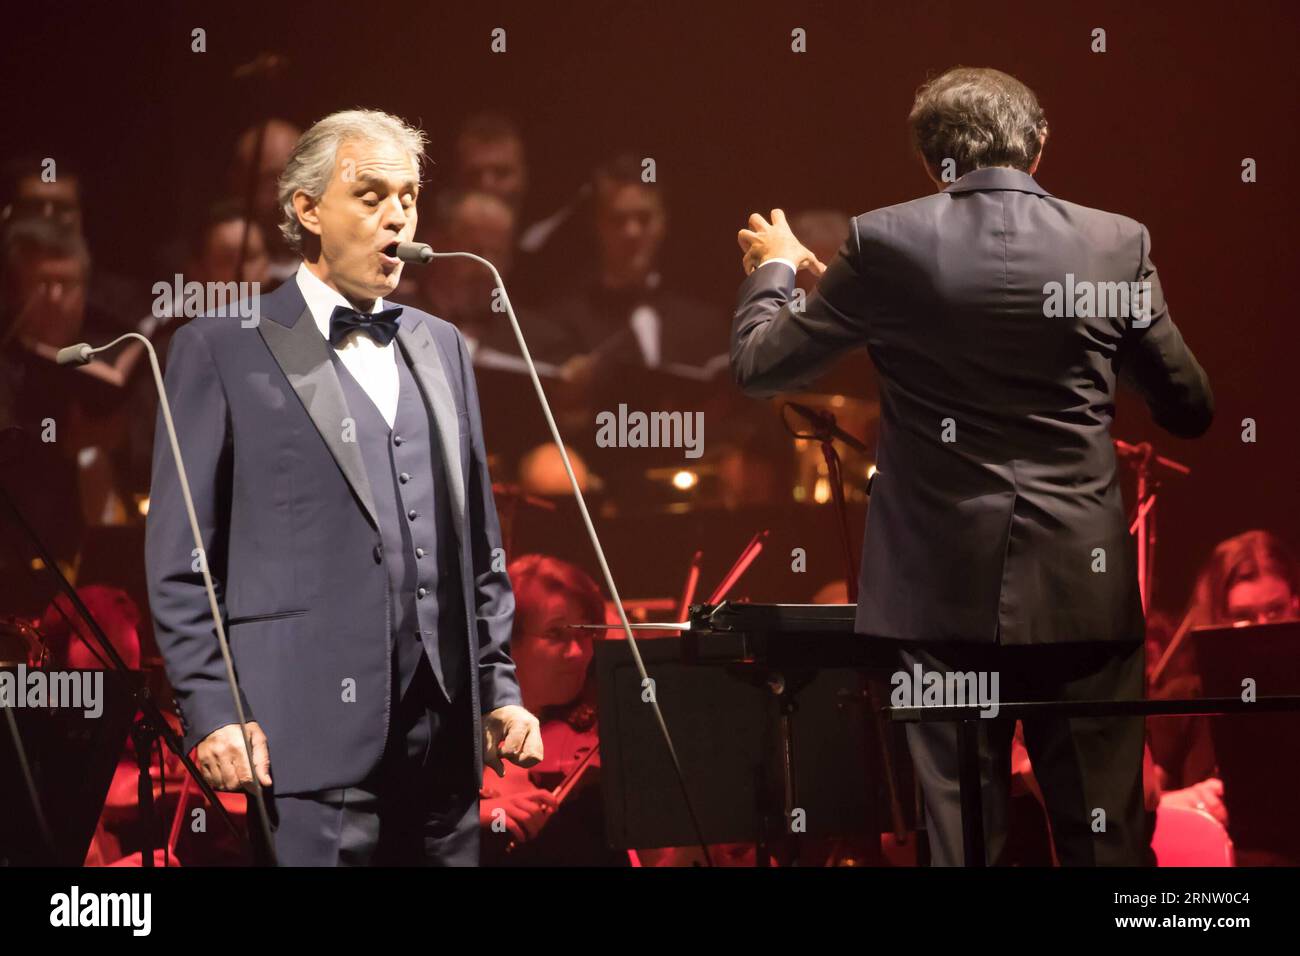 (171125) -- BUDAPEST, Nov. 25, 2017 -- Italian blind opera singer Andrea Bocelli (L) sings during his concert at Papp Laszlo Sports Arena in Budapest, Hungary, on Nov. 25, 2017. ) HUNGARY-BUDAPEST-ITALY-ANDREA BOCELLI-CONCERT AttilaxVolgyi PUBLICATIONxNOTxINxCHN Stock Photo